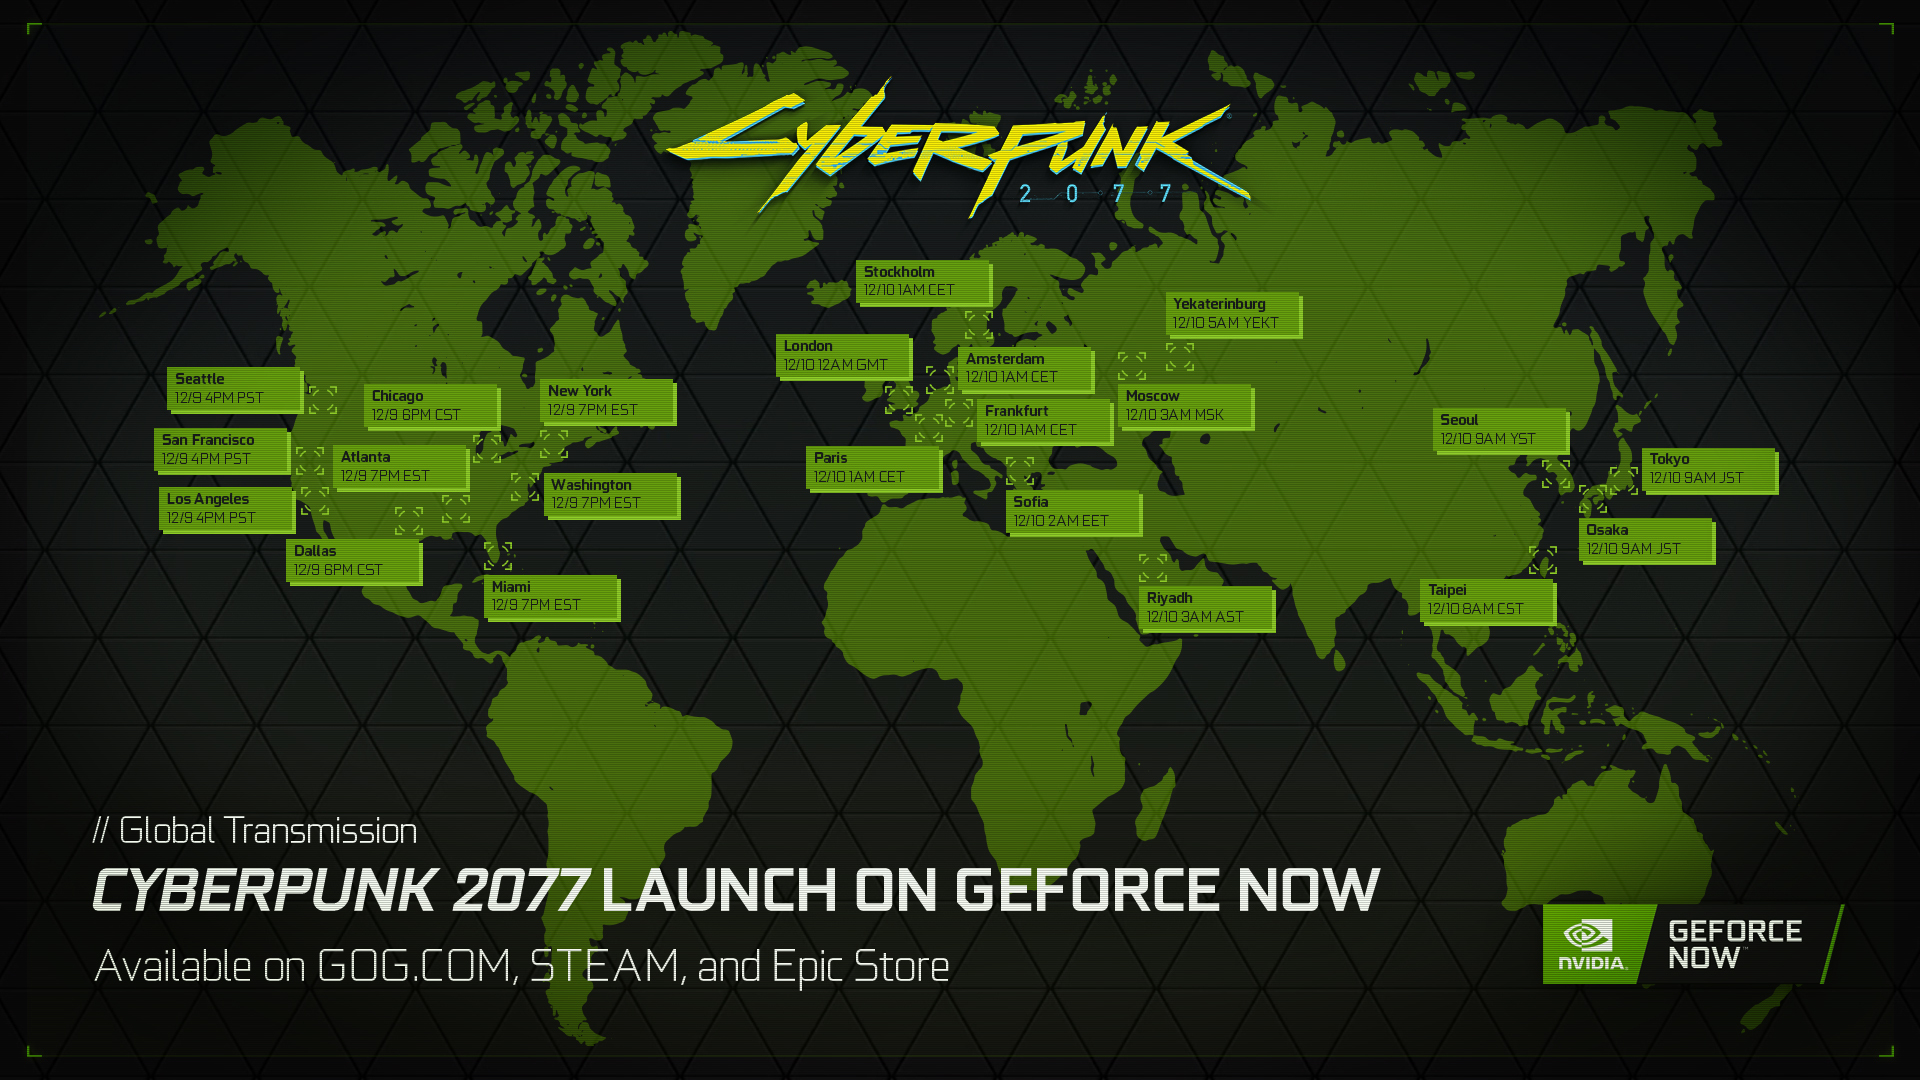 Are you ready to get steamy with NVIDIA GeForce Now server status?